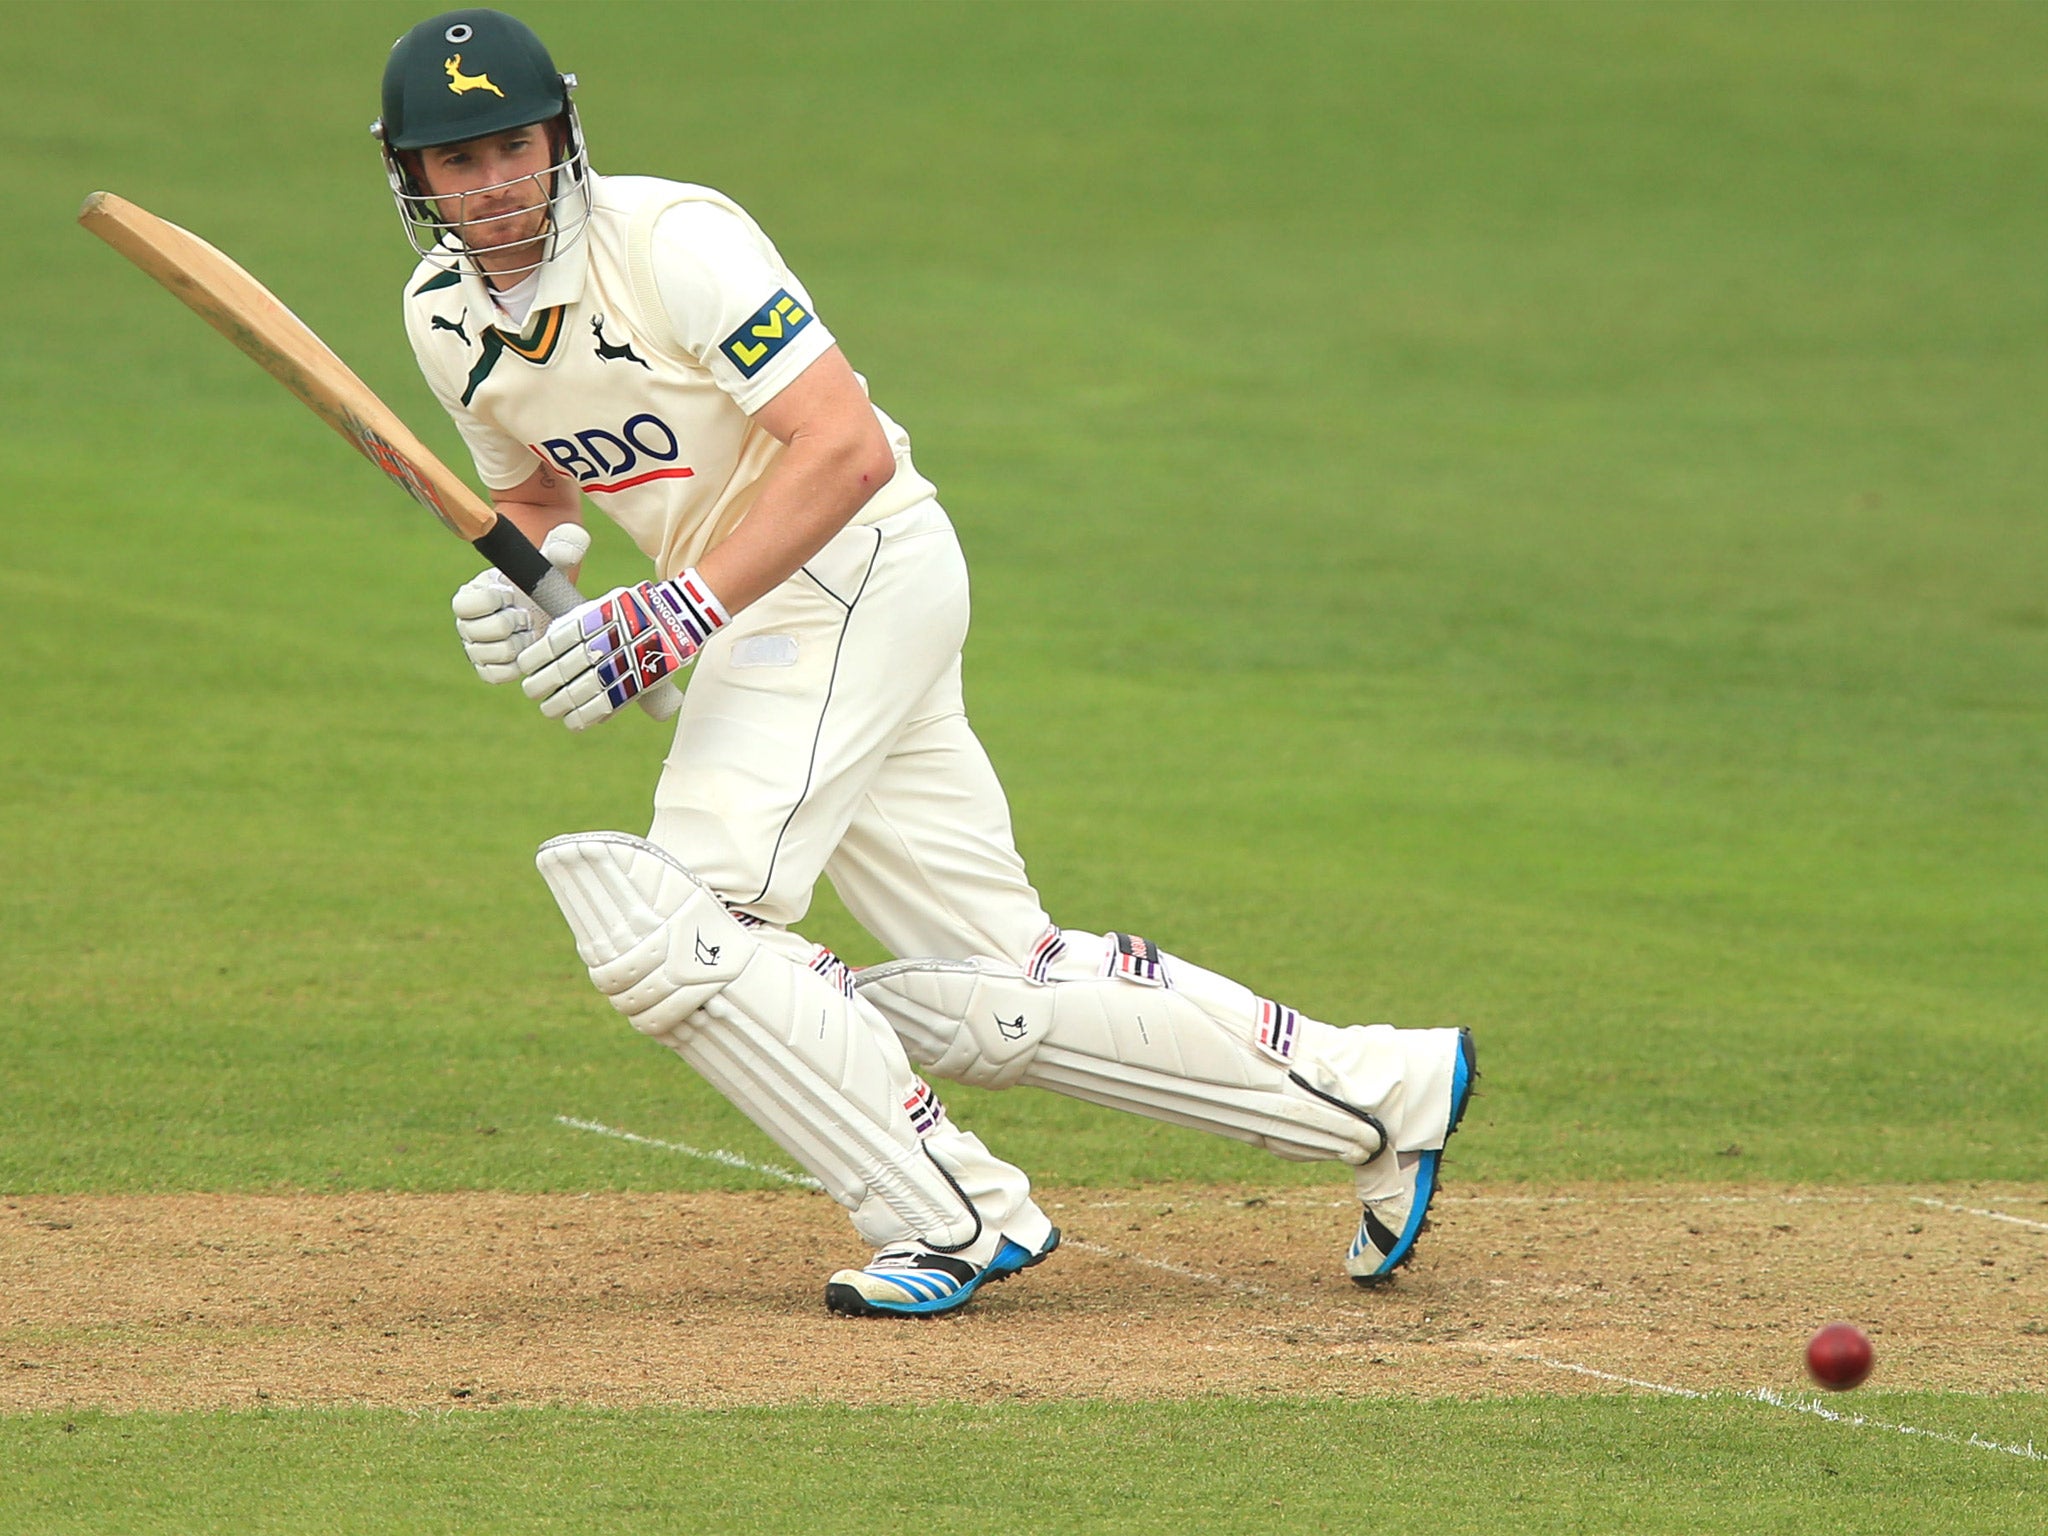 Riki Wessels hit 10 fours and two sixes on the way to his innings of 90